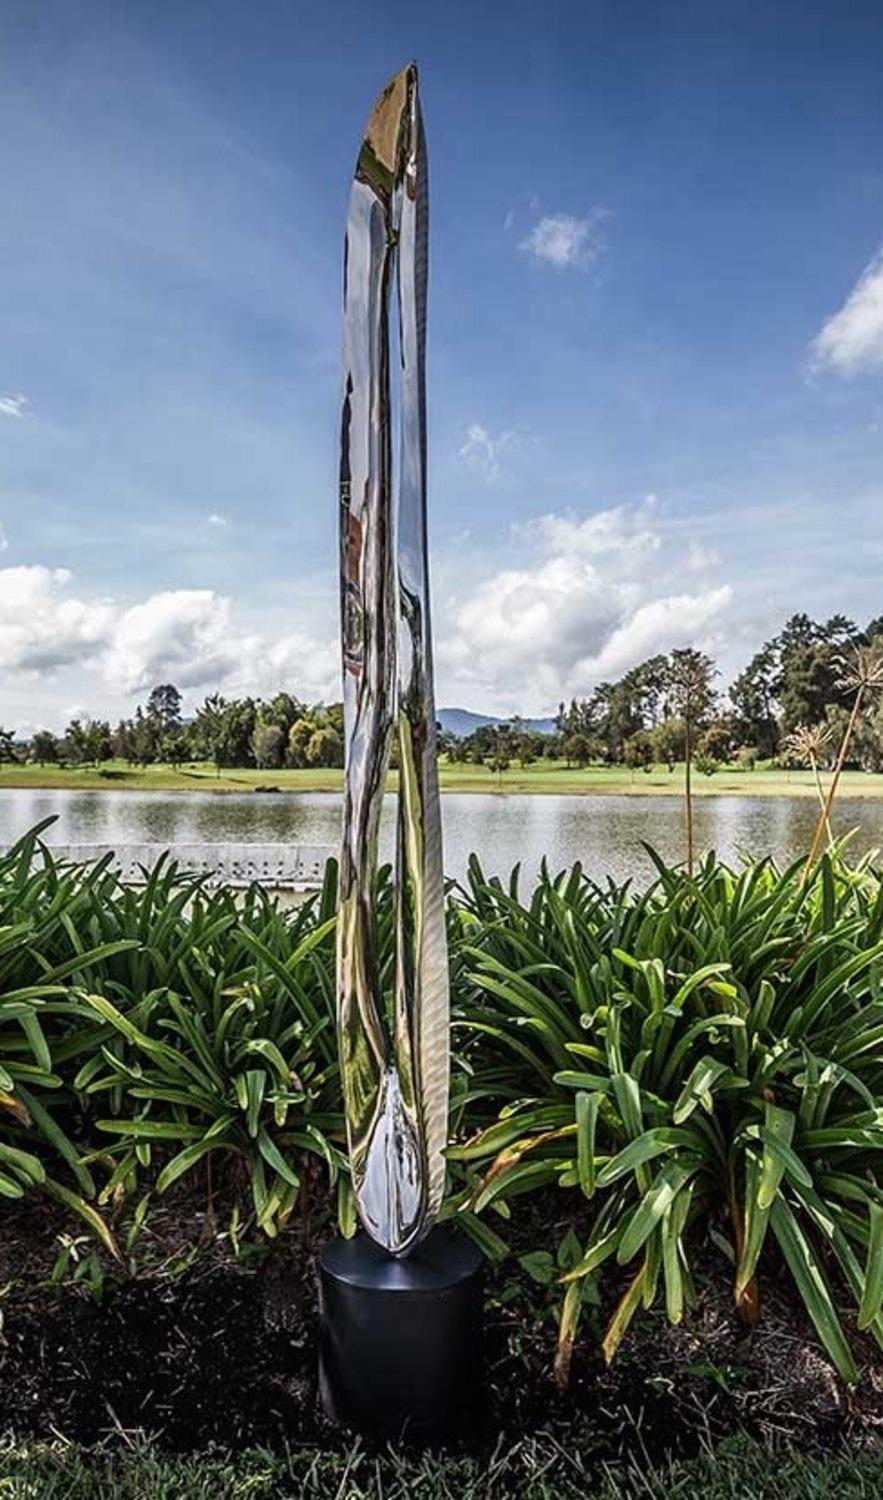 Edition of 7
Sculptor Santiago Medina Italian stainless steel sculptures are at marquee public art venues worldwide such as Harvard, Stanford University, City of Miami-Pinecrest Circle, Tufts, Washington University, Historical Pinecrest Botanical